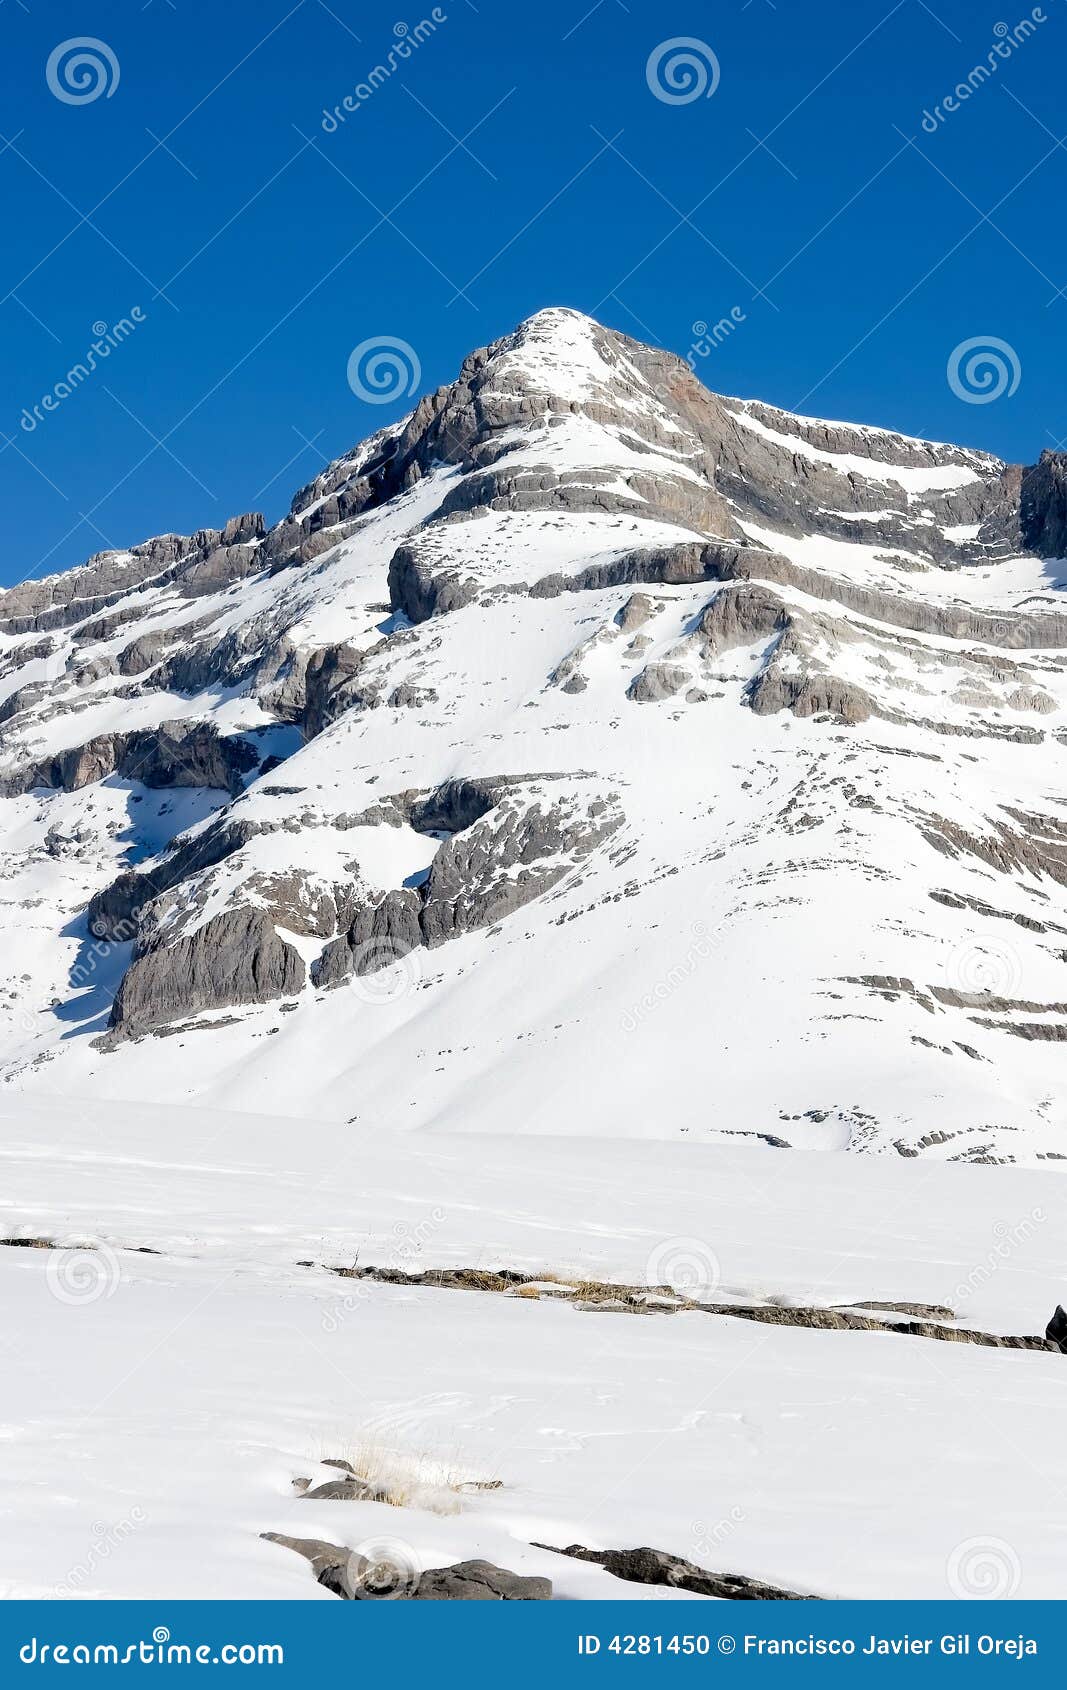 summit of the monte perdido covered with snow